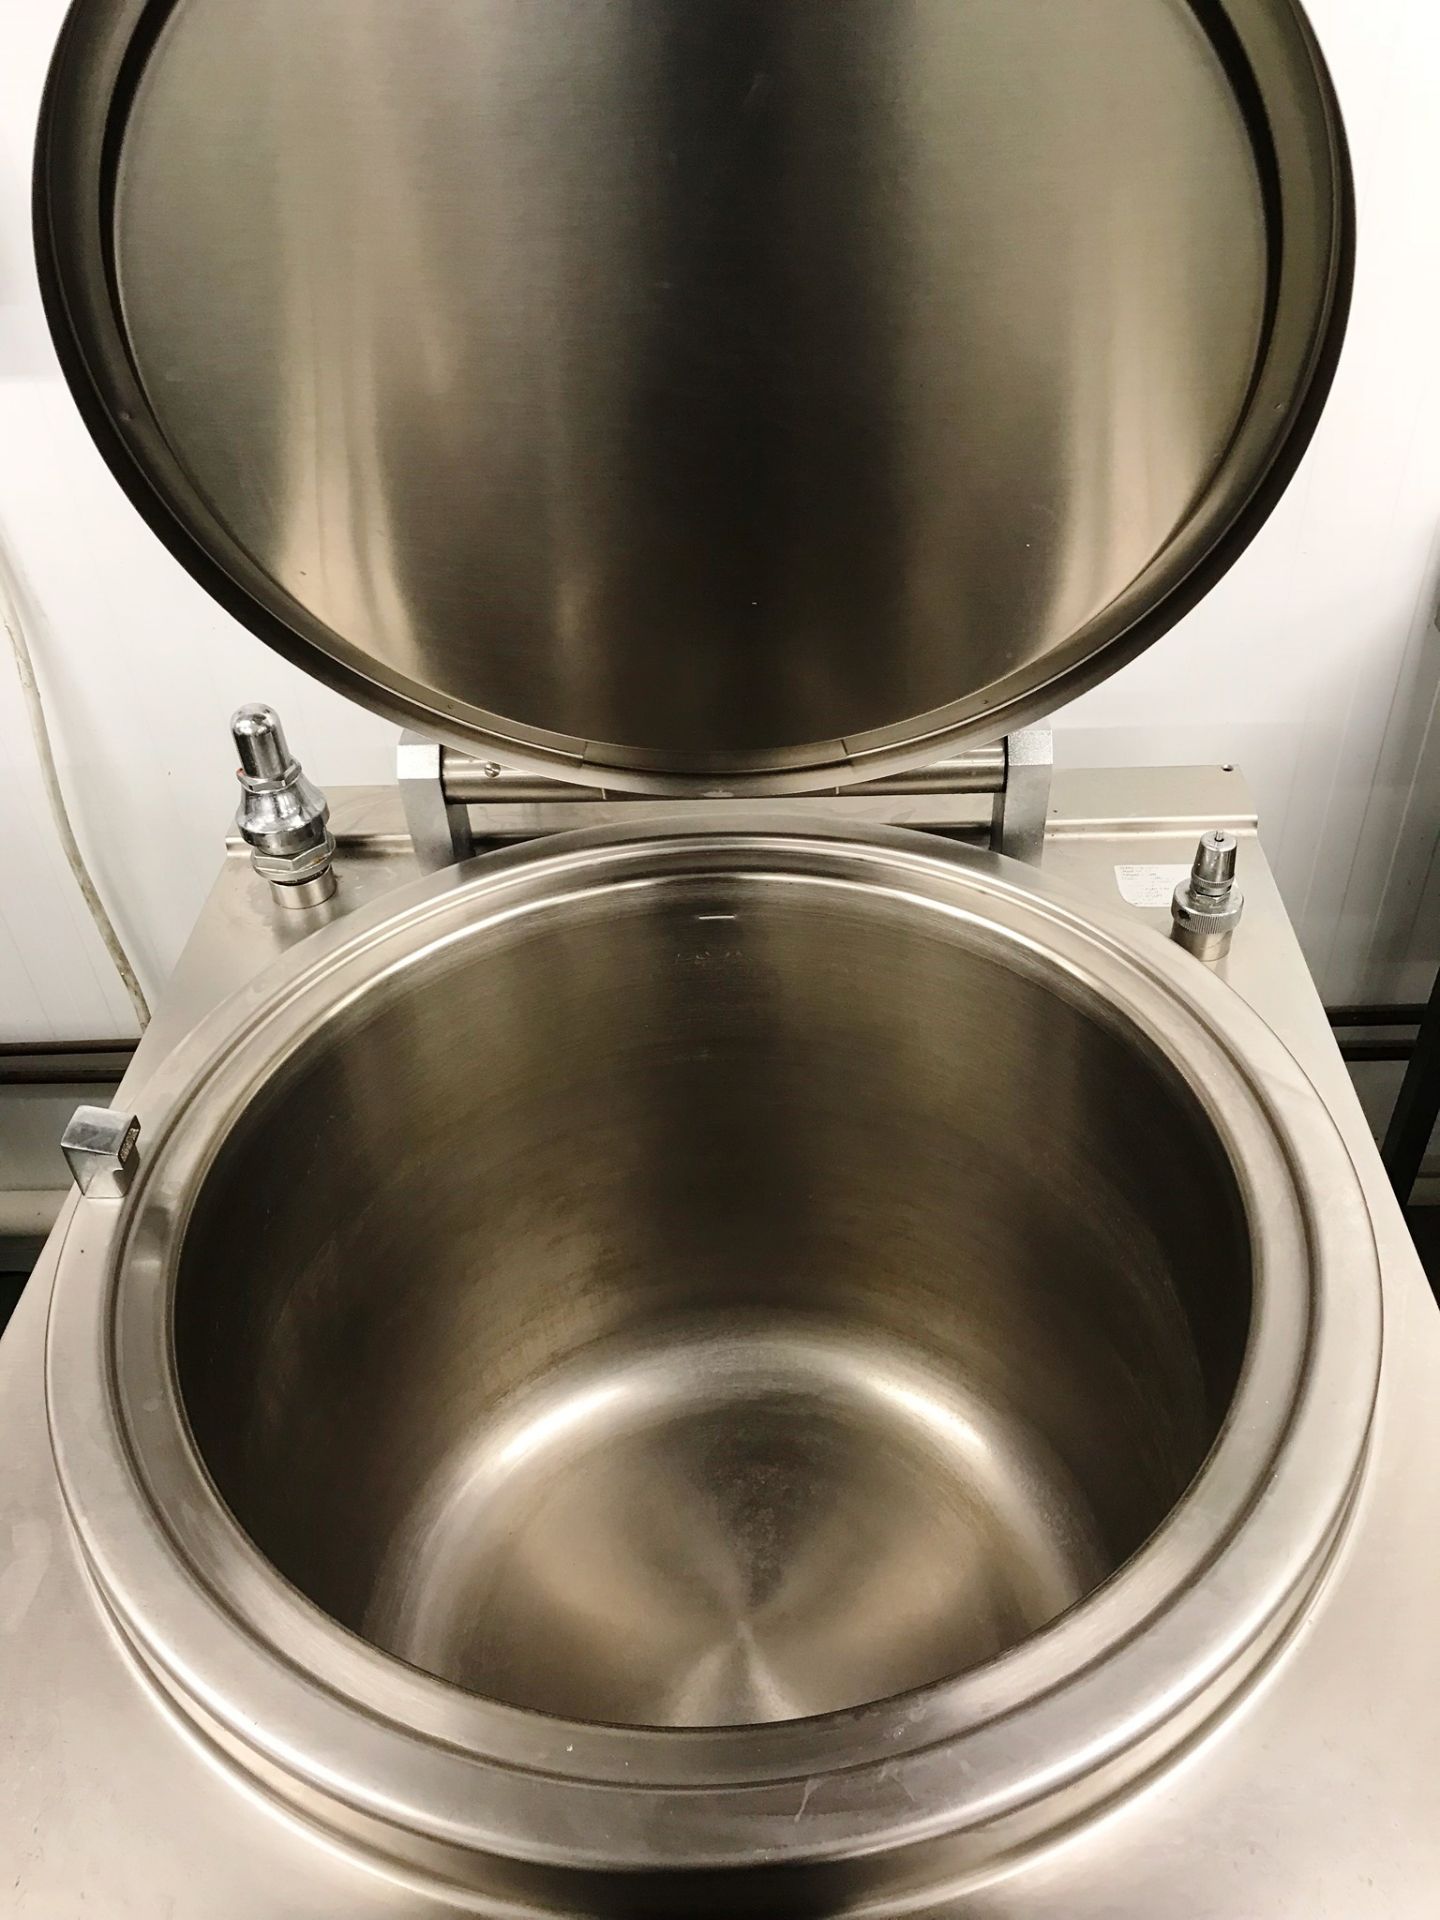 Cook Professional Electric Indirect Boiling Pan | Assumed to be 150L - Image 3 of 3